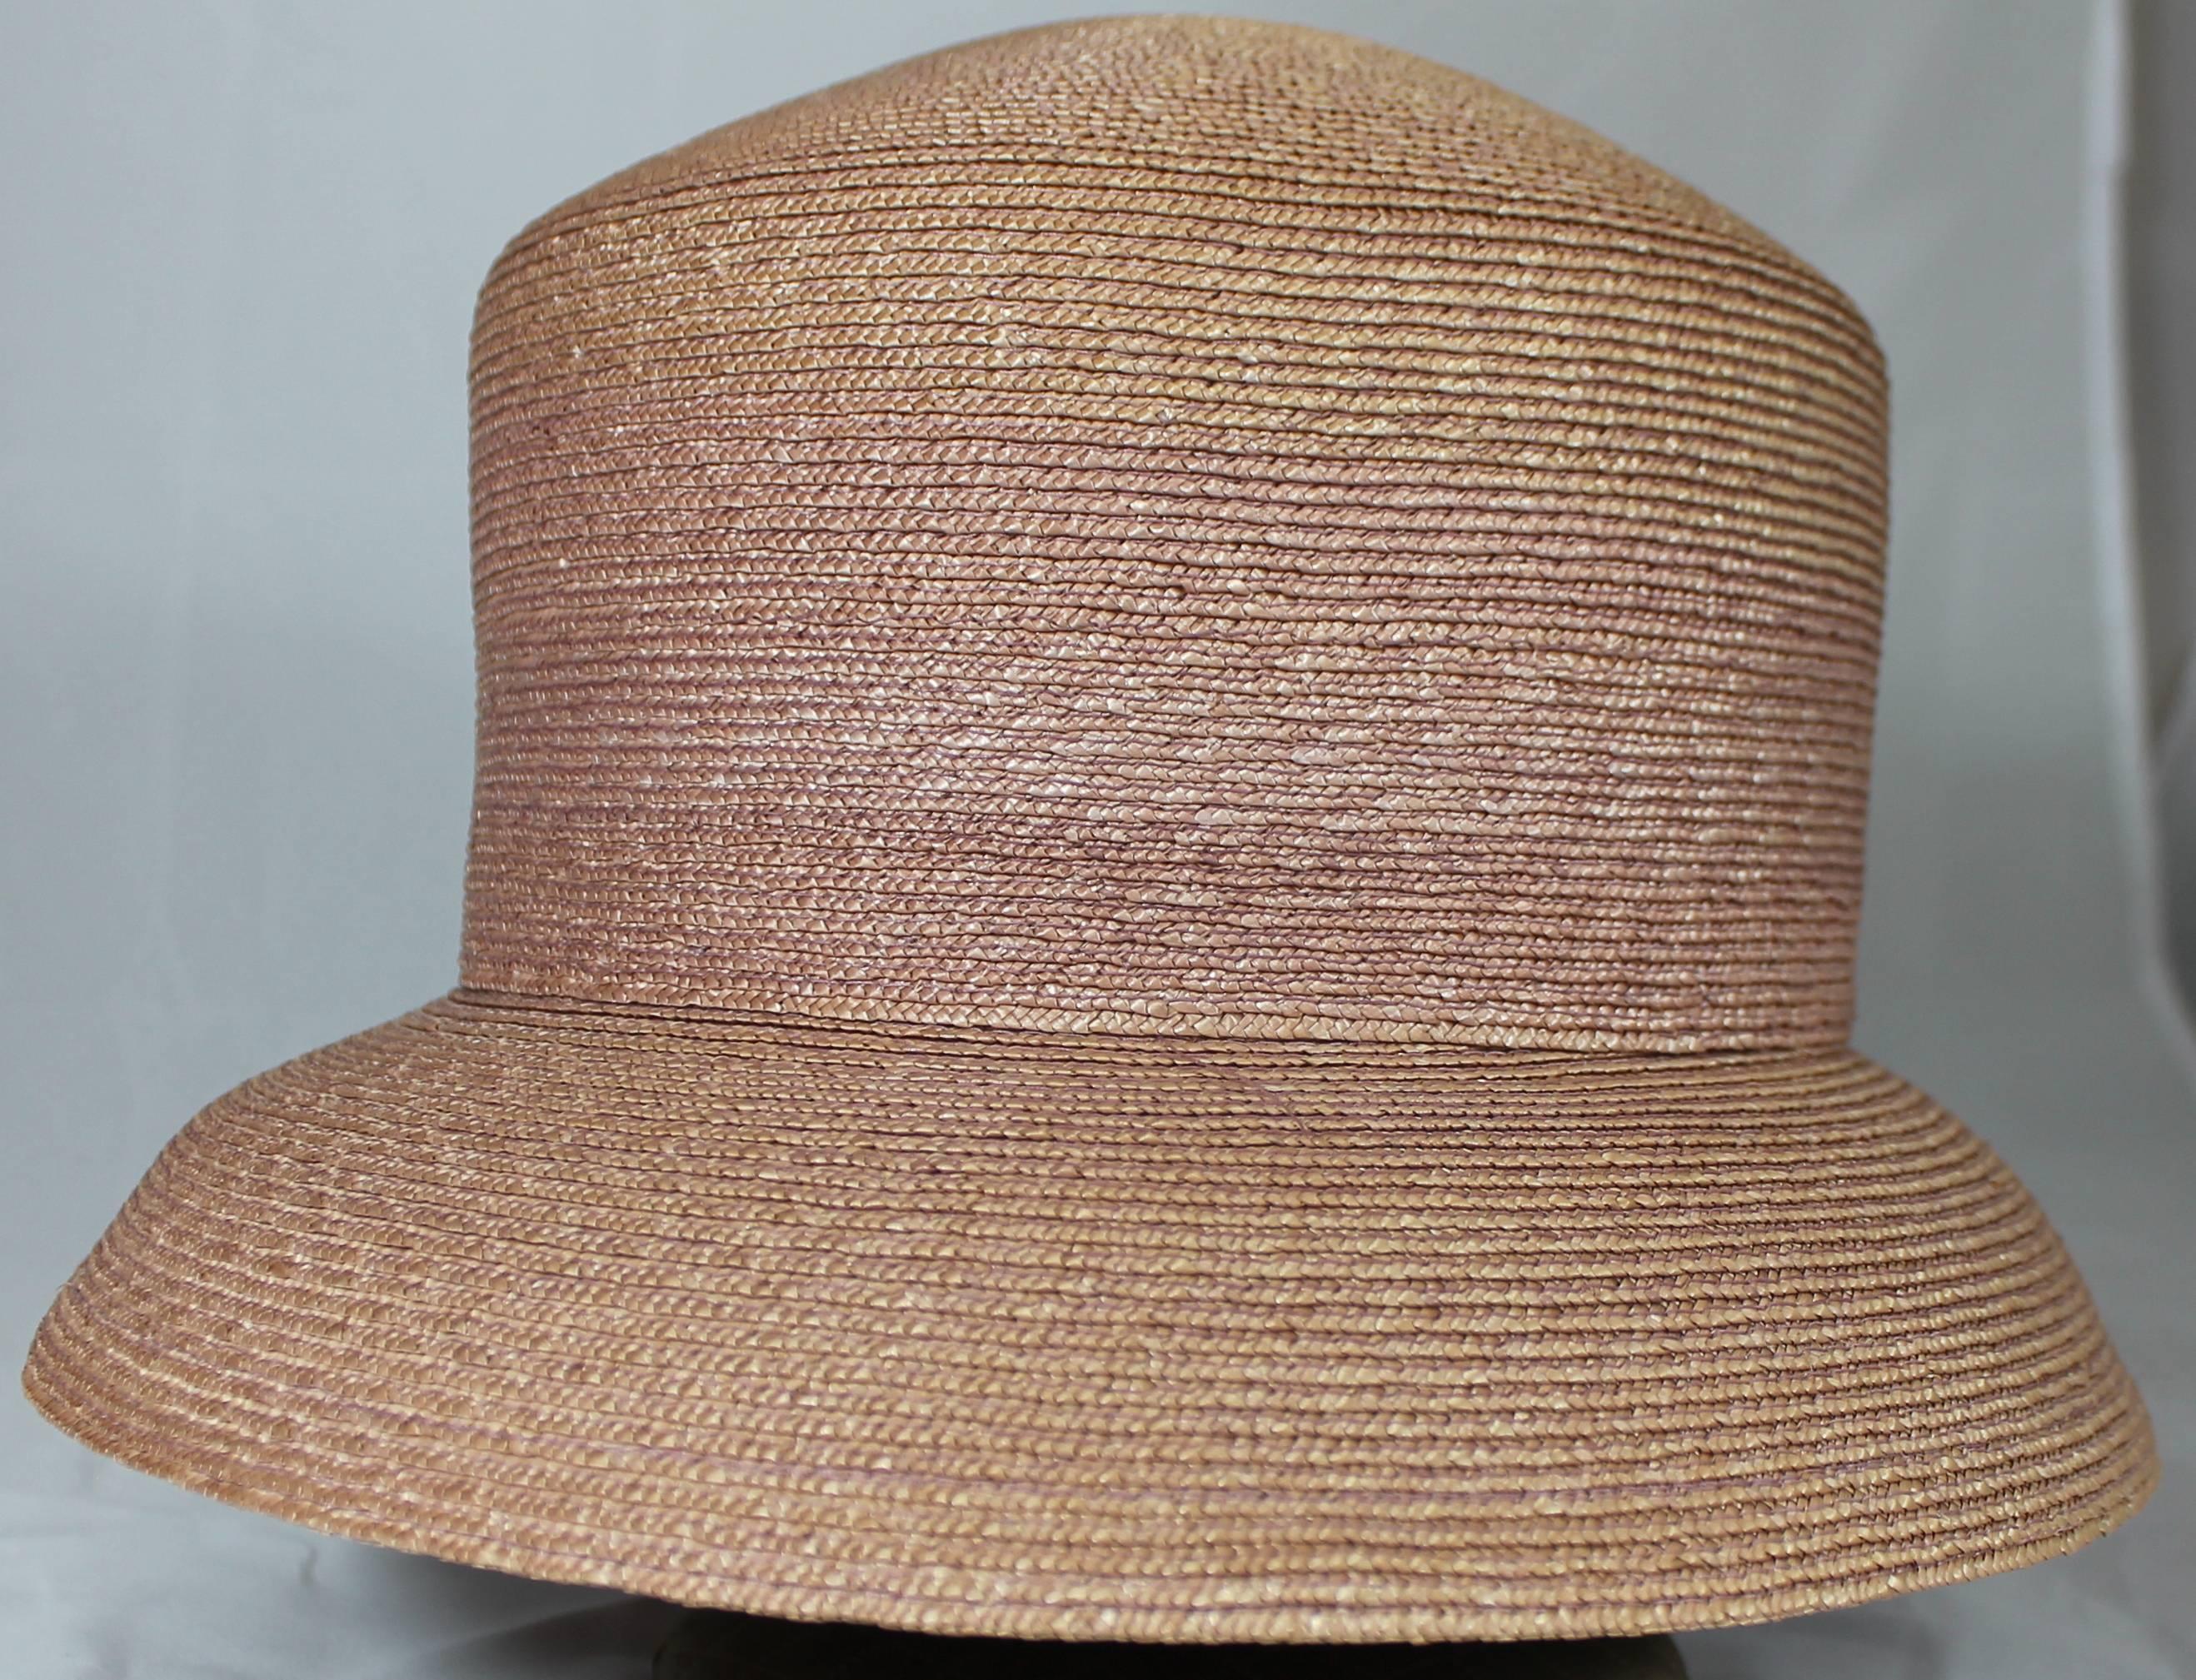 Suzanne Couture Millinery Blush Straw Hat. This hat is a rosy blush color. It is in excellent condition. 

Measurements:
Circumference: about 20.75